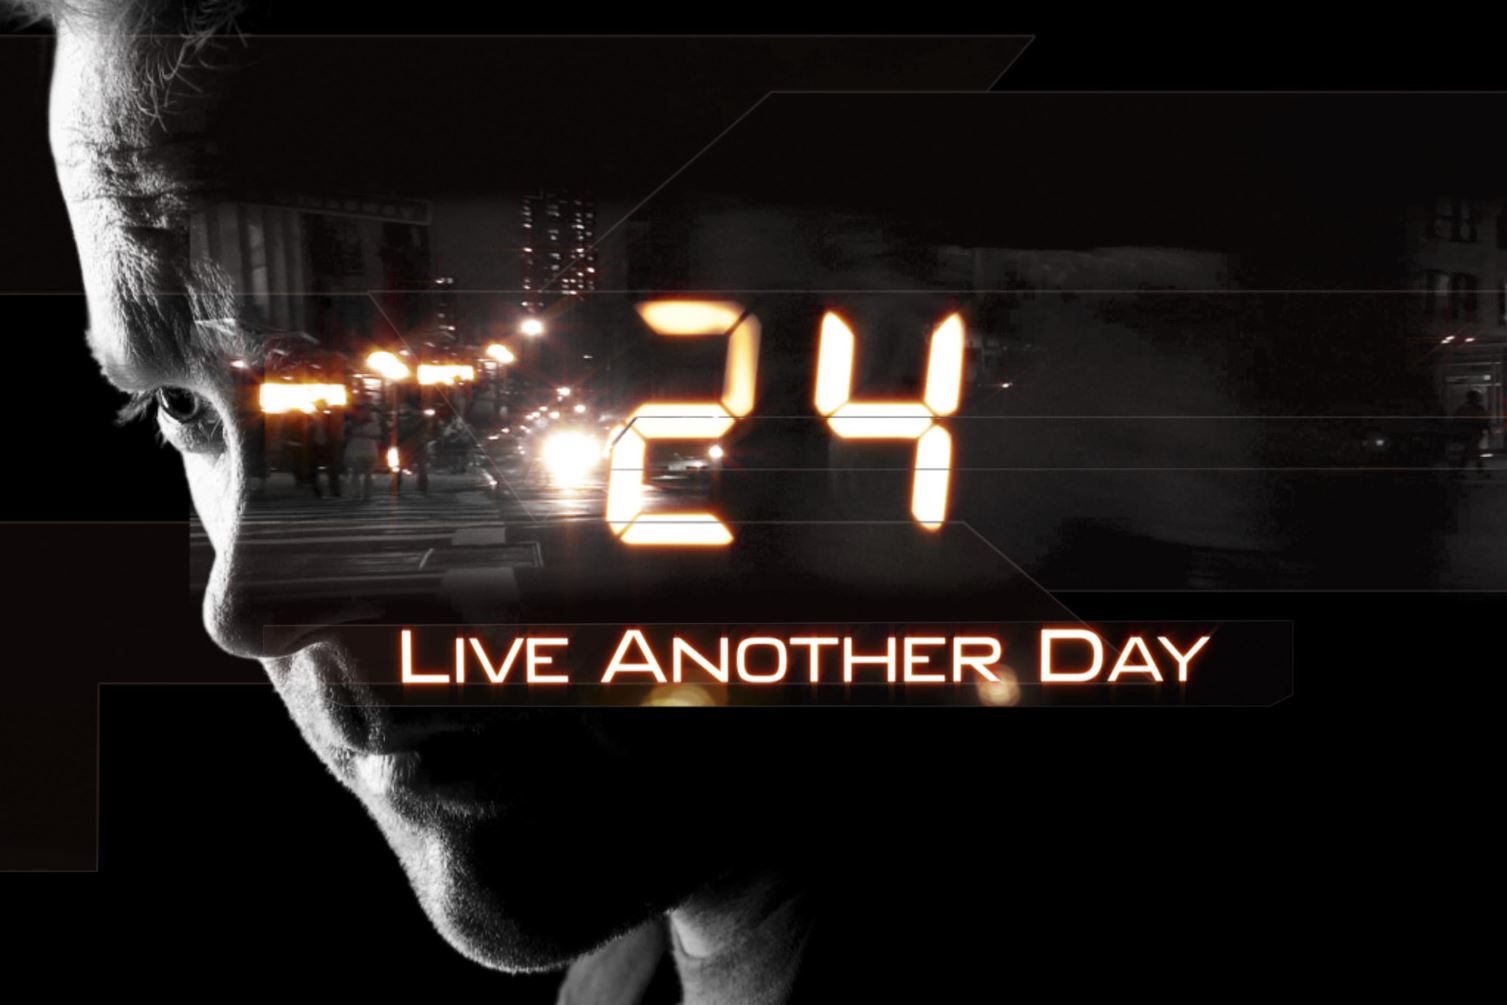 Dalia Gellert - FILM AND DRAMA - 24: LIVE ANOTHER DAY 